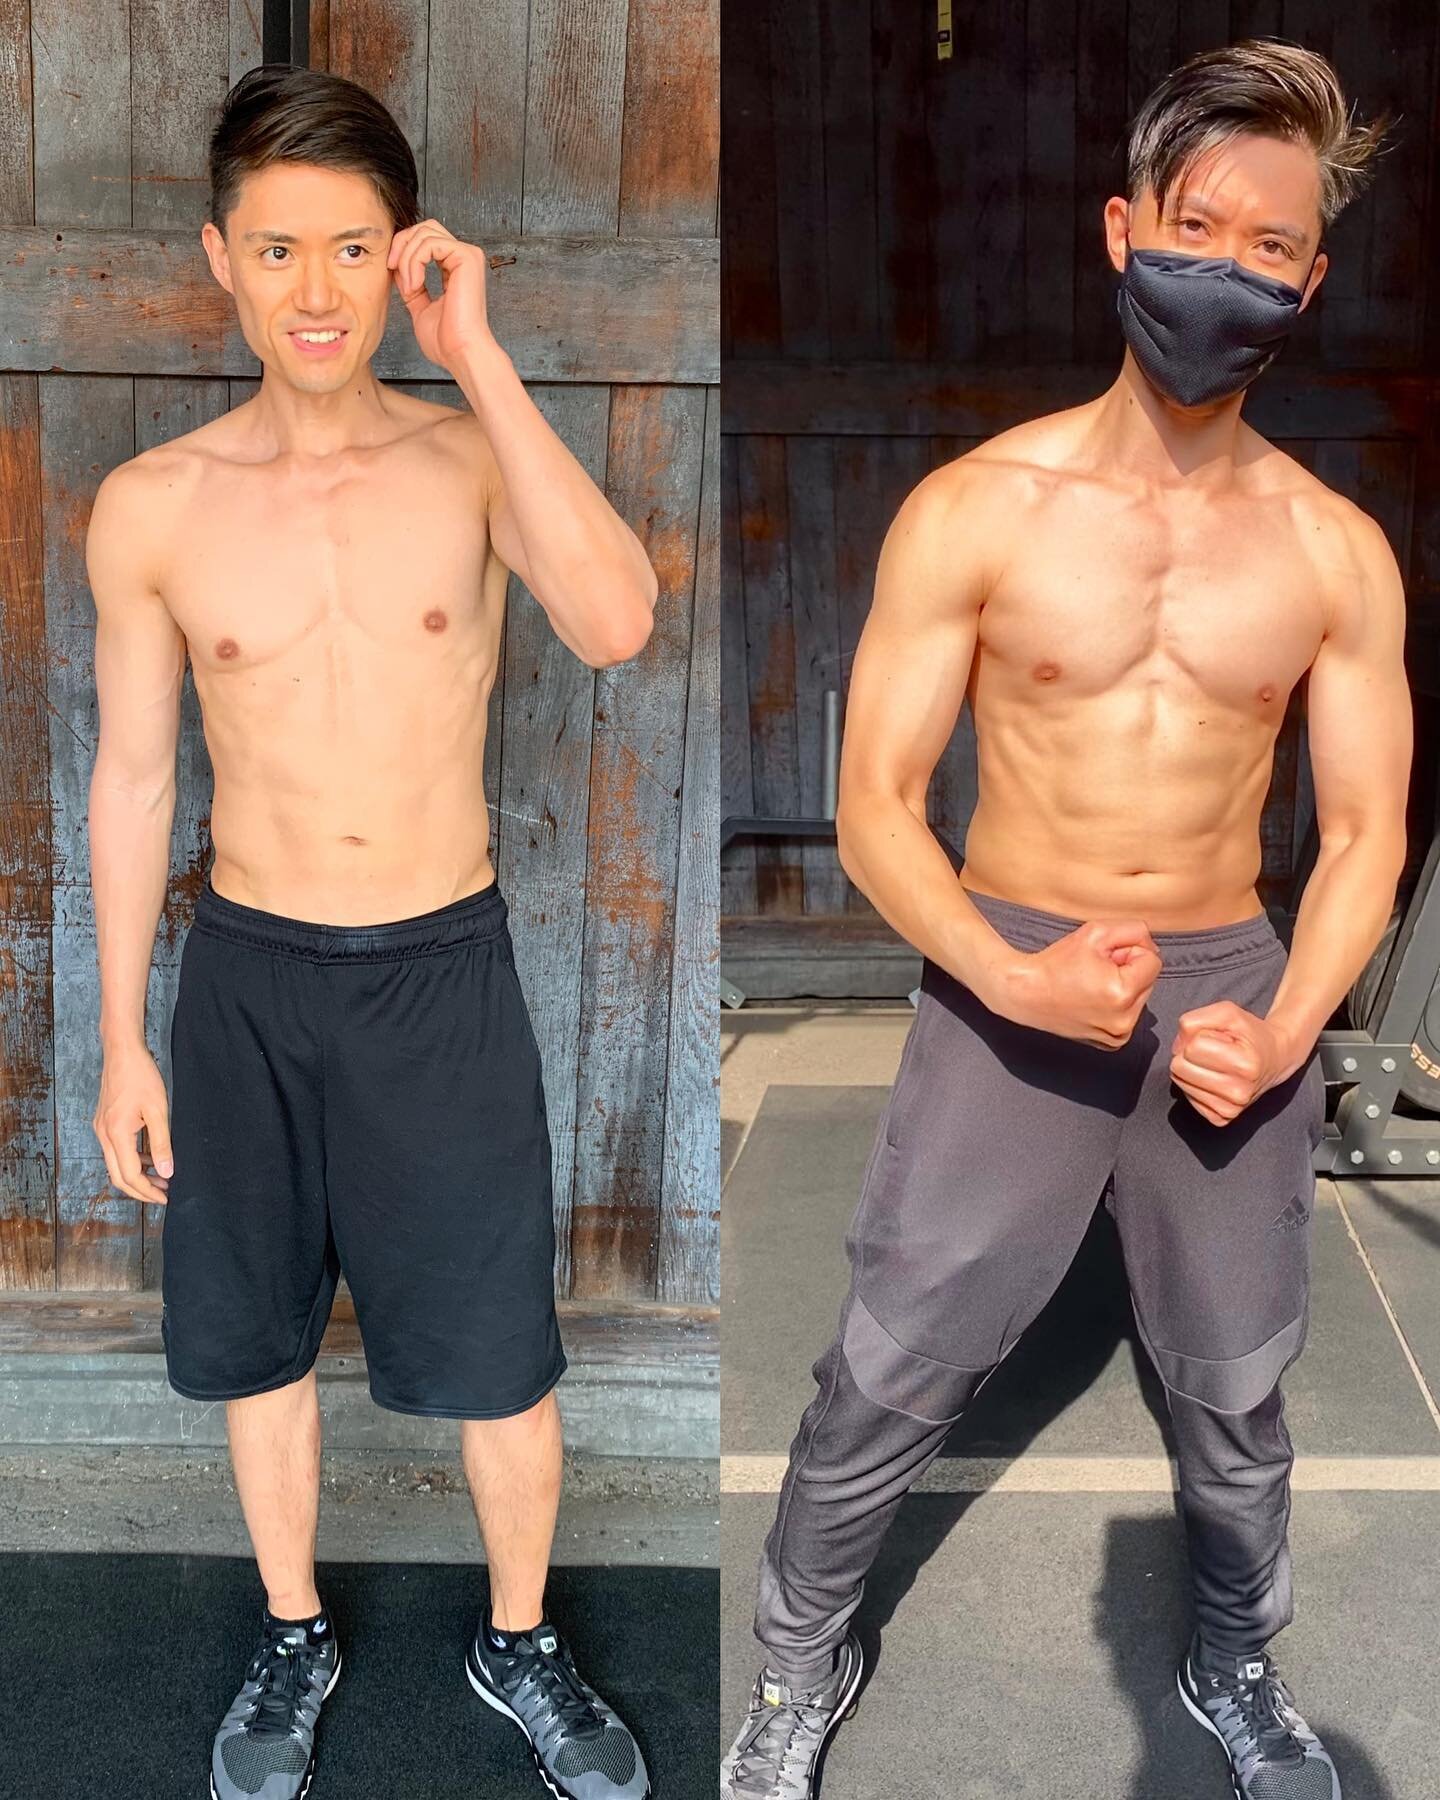 There&rsquo;s not a lot to flex about in 2020 but here&rsquo;s my post-quarantine 3-month workout journey with @karl.flrs I&rsquo;m super grateful for him as he really helped me get through a challenging year 🙏🏽 looking forward to 2021!